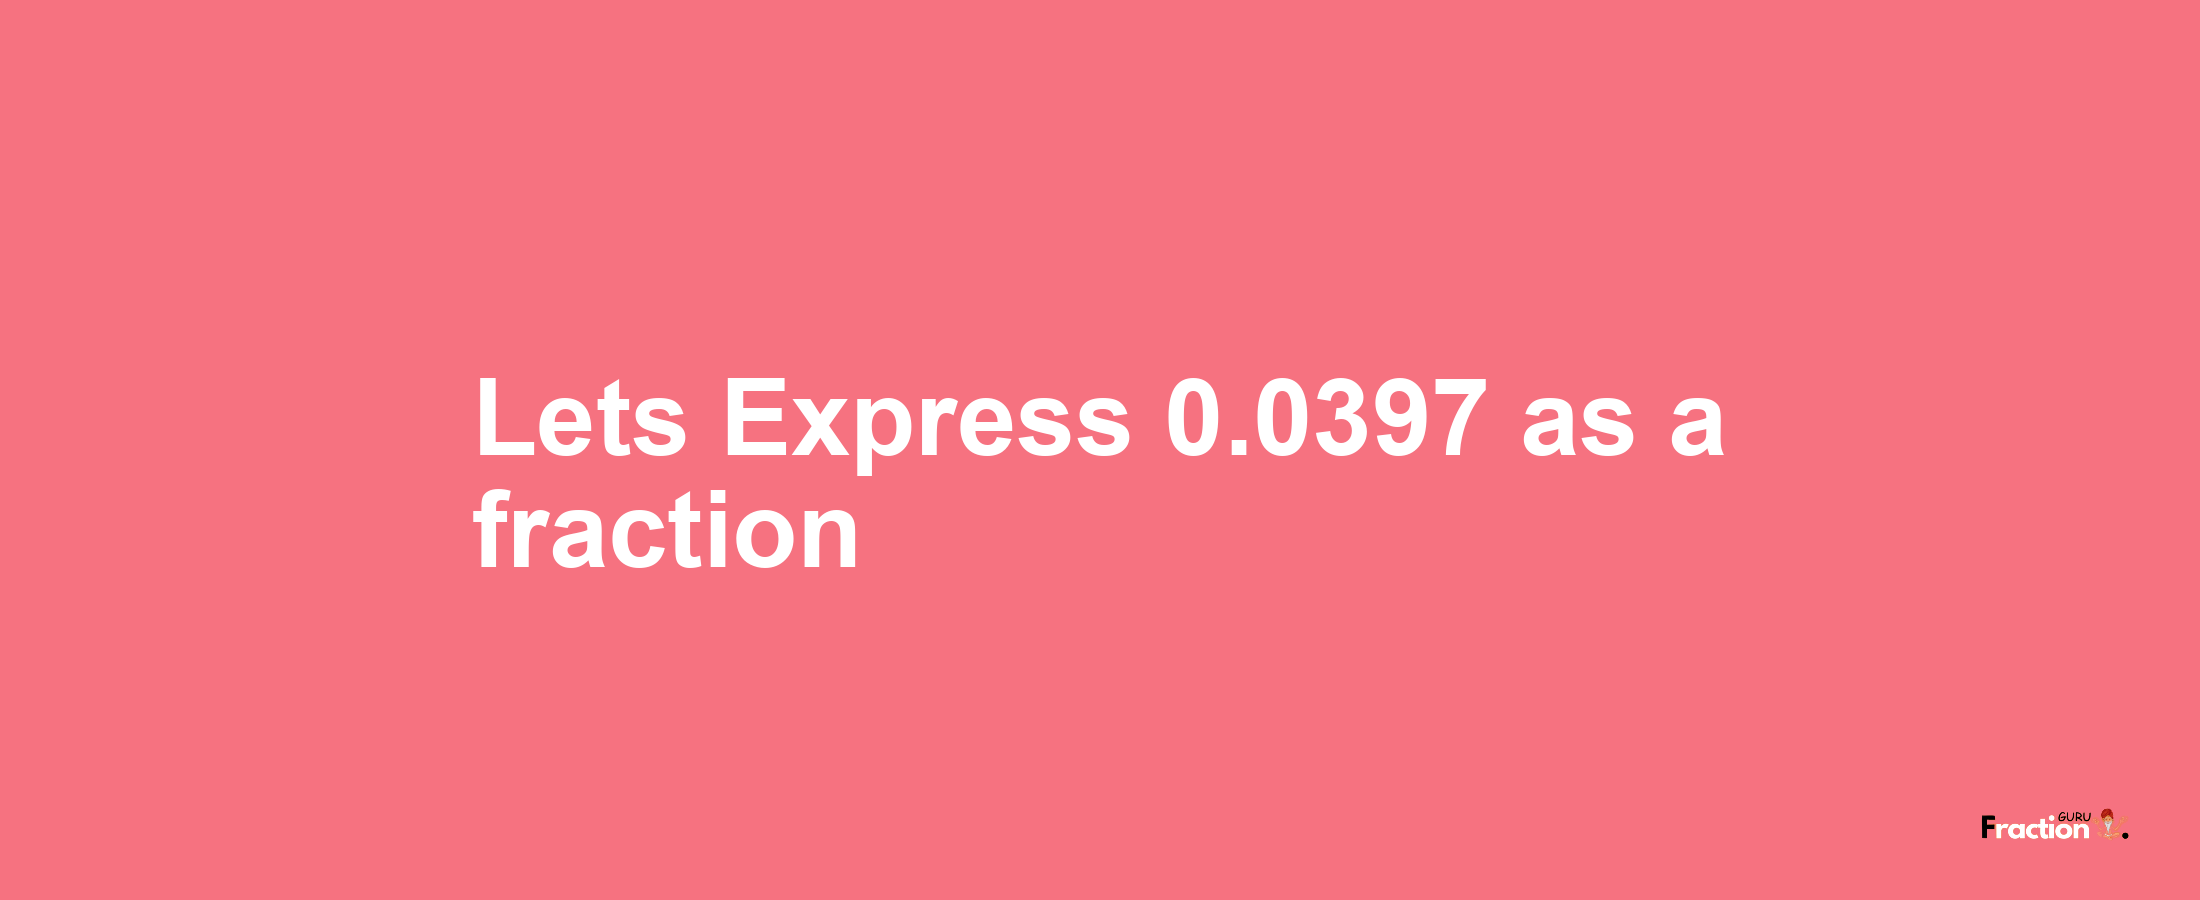 Lets Express 0.0397 as afraction